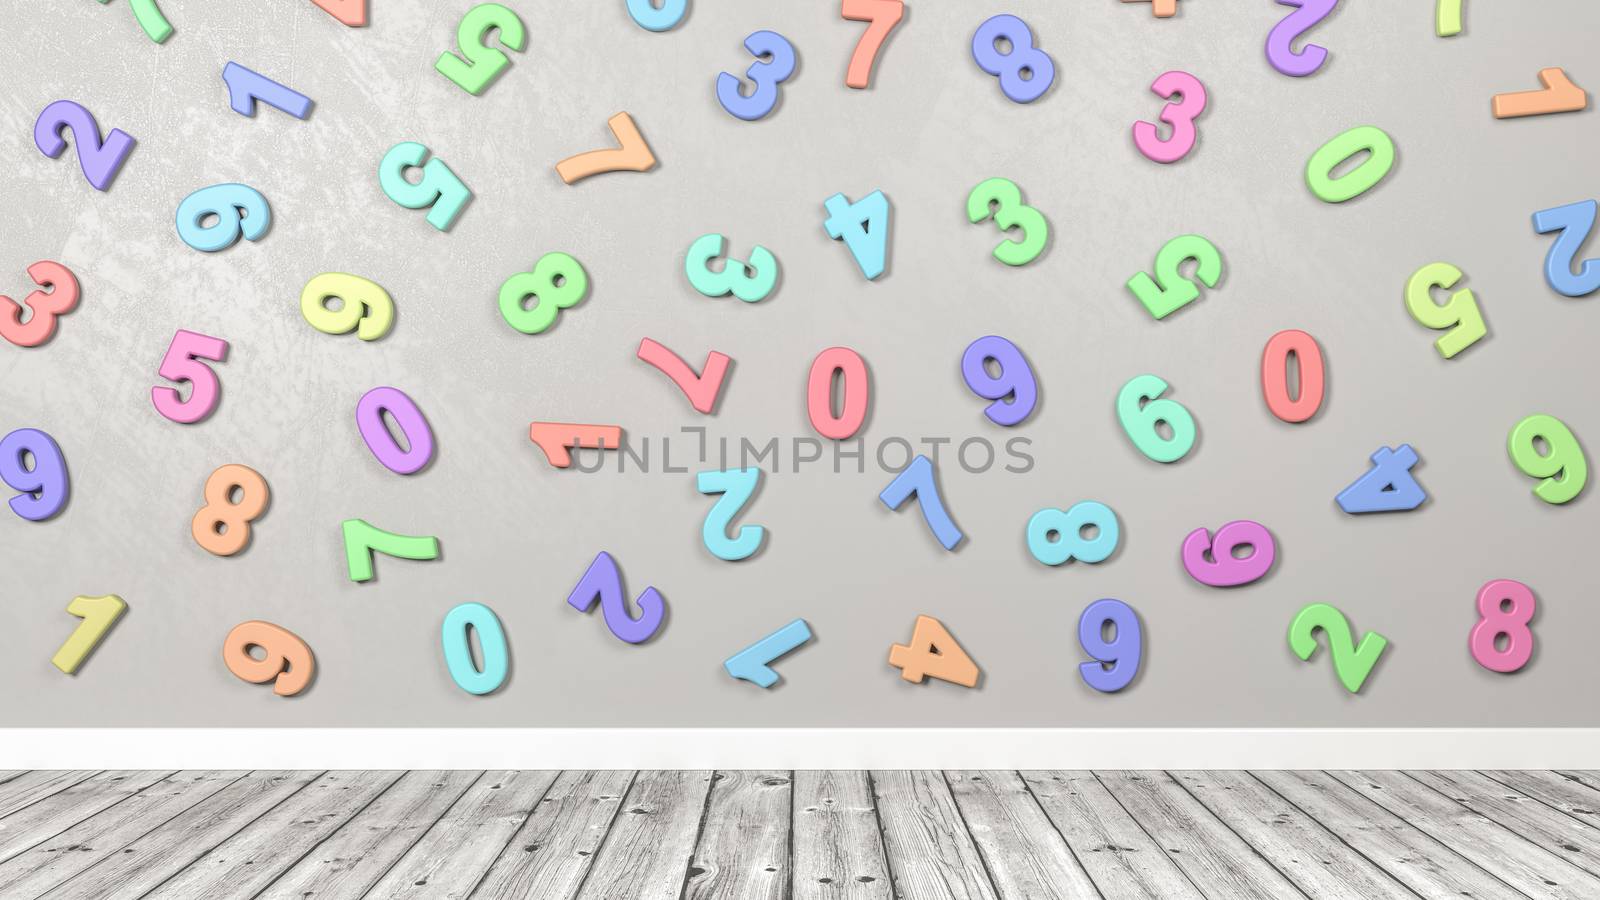 3D Colorful Numbers Against a Gray Wall in a Wooden Floor Room 3D Illustration